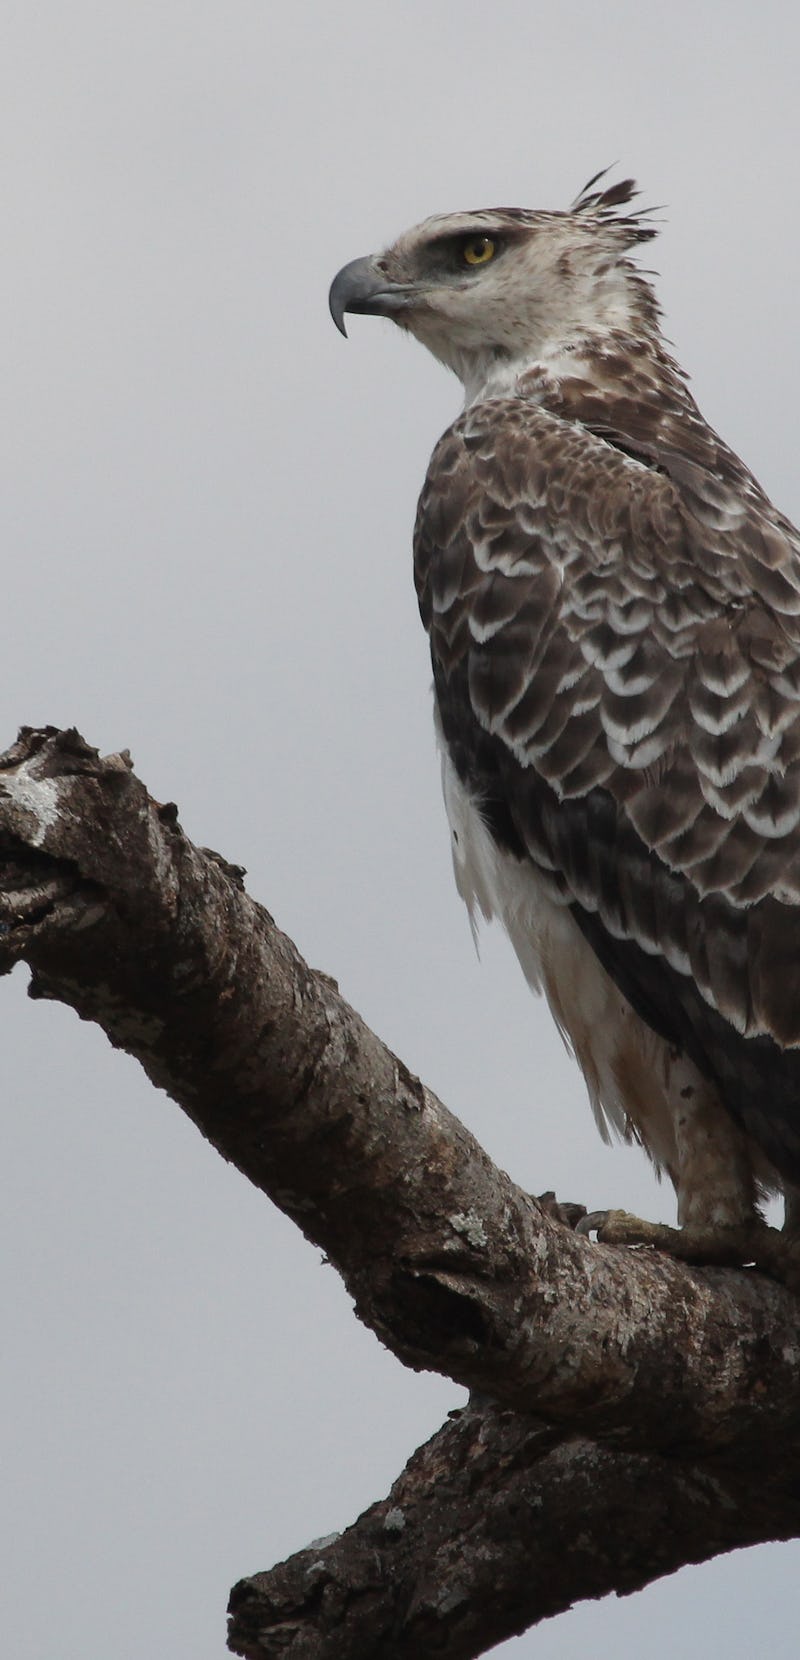 The Martial Eagle is a powerful raptor native to sub-Saharan Africa.